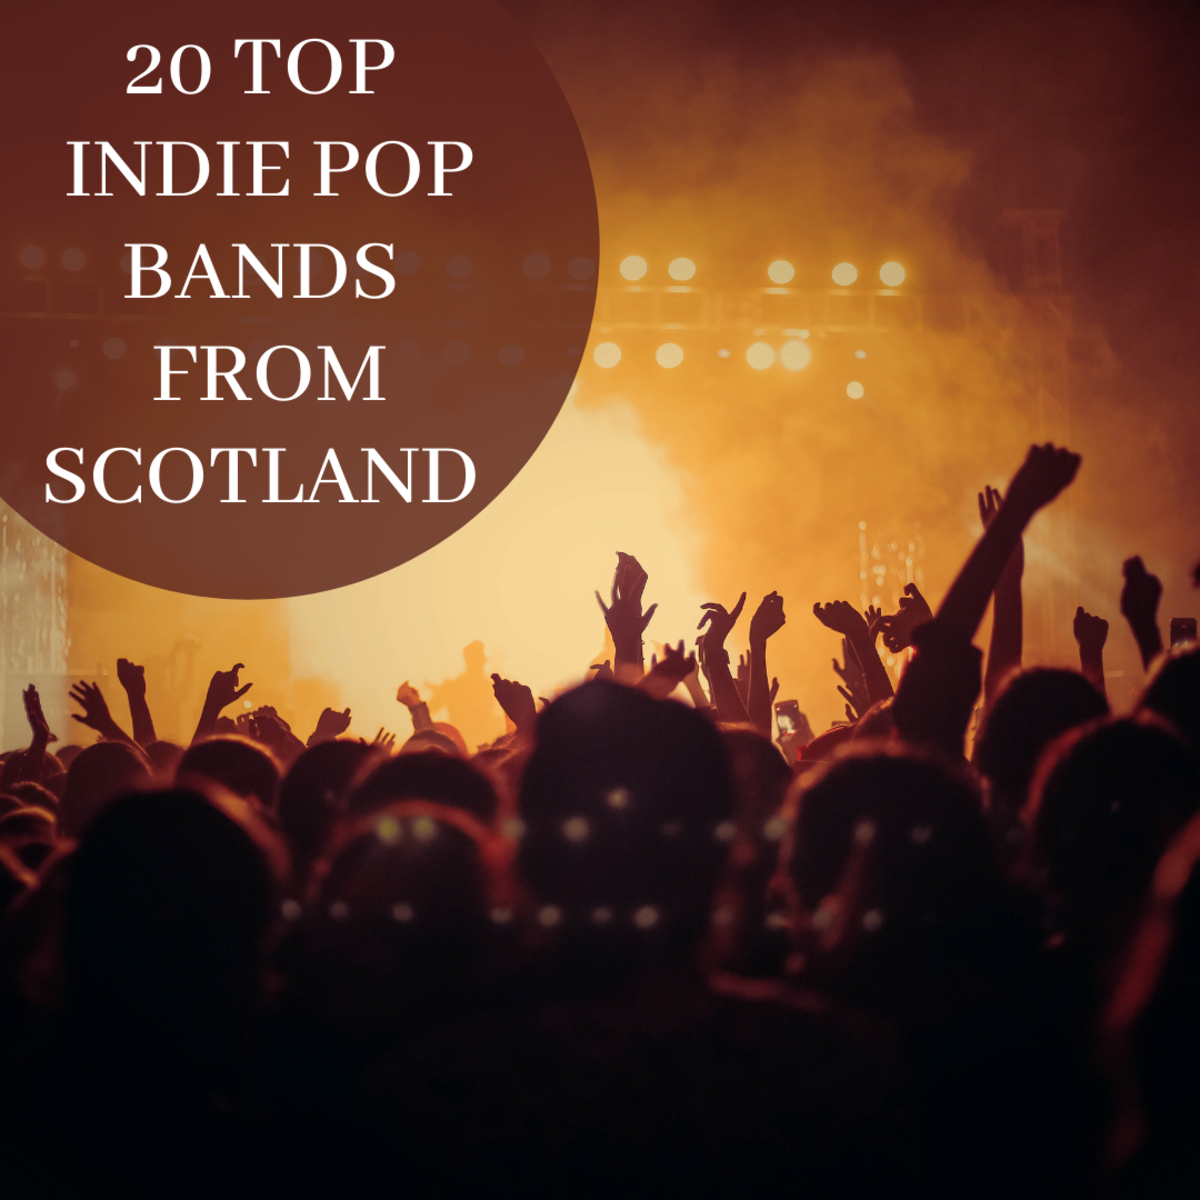 Scotland has produced many top notch bands in the 21st century.